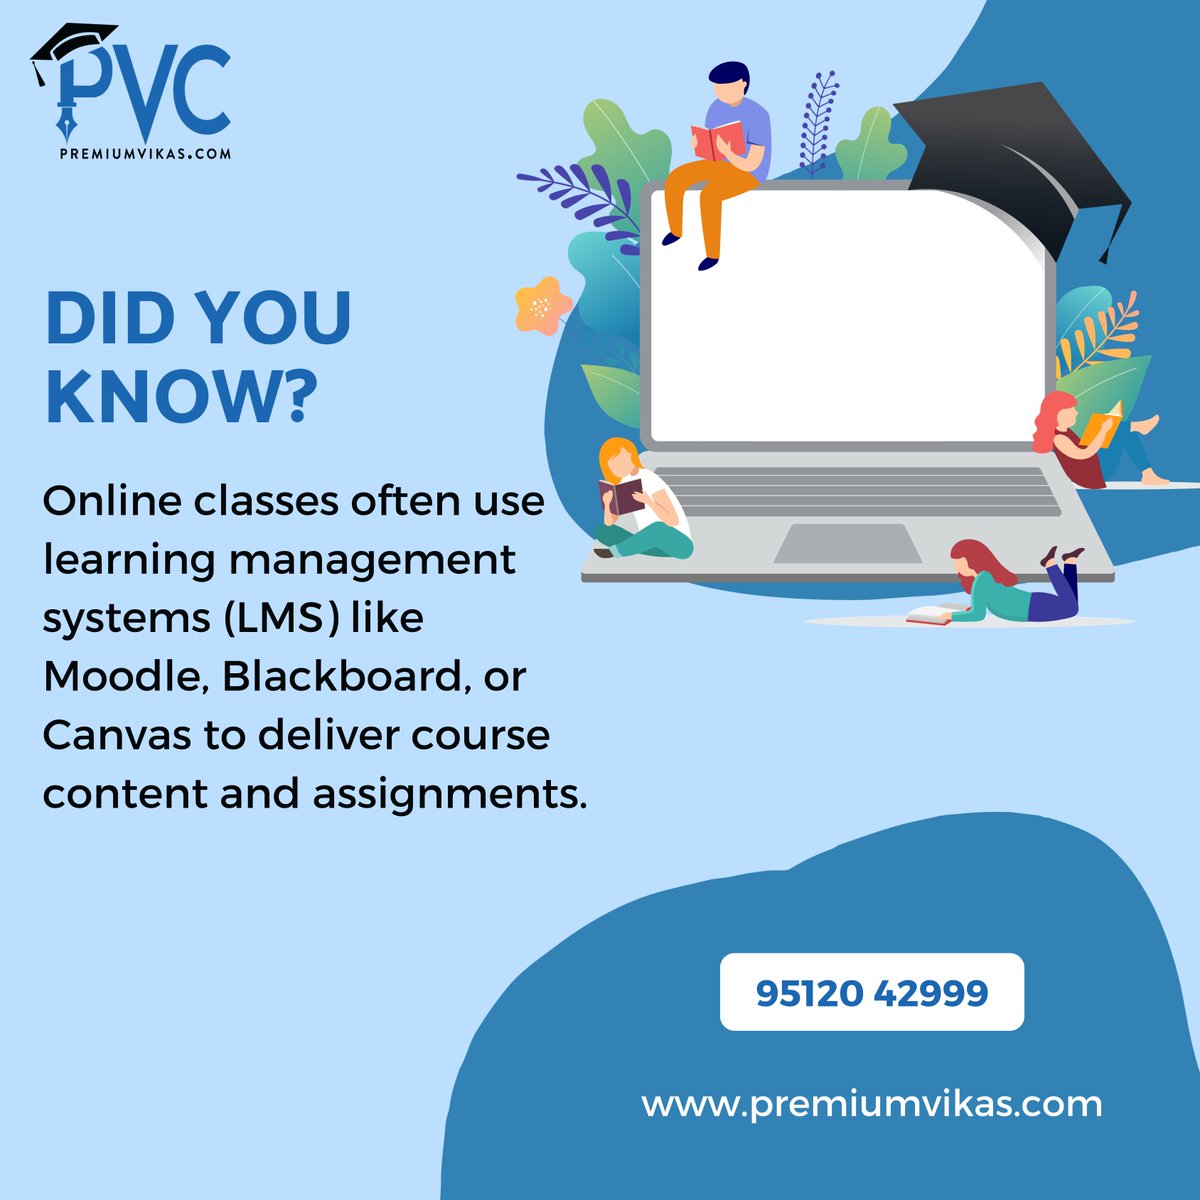 Interesting Fact about Online Classes.
.
.
#OnlineClass
#VirtualLearning
#RemoteEducation
#Elearning
#DigitalClassroom
#OnlineLearning
#DistanceLearning
#OnlineEducation
#StayConnected
#EducateFromHome
#VirtualClass
#Webinar
#OnlineTeaching
#StudyFromHome
#DigitalLearning
#surat